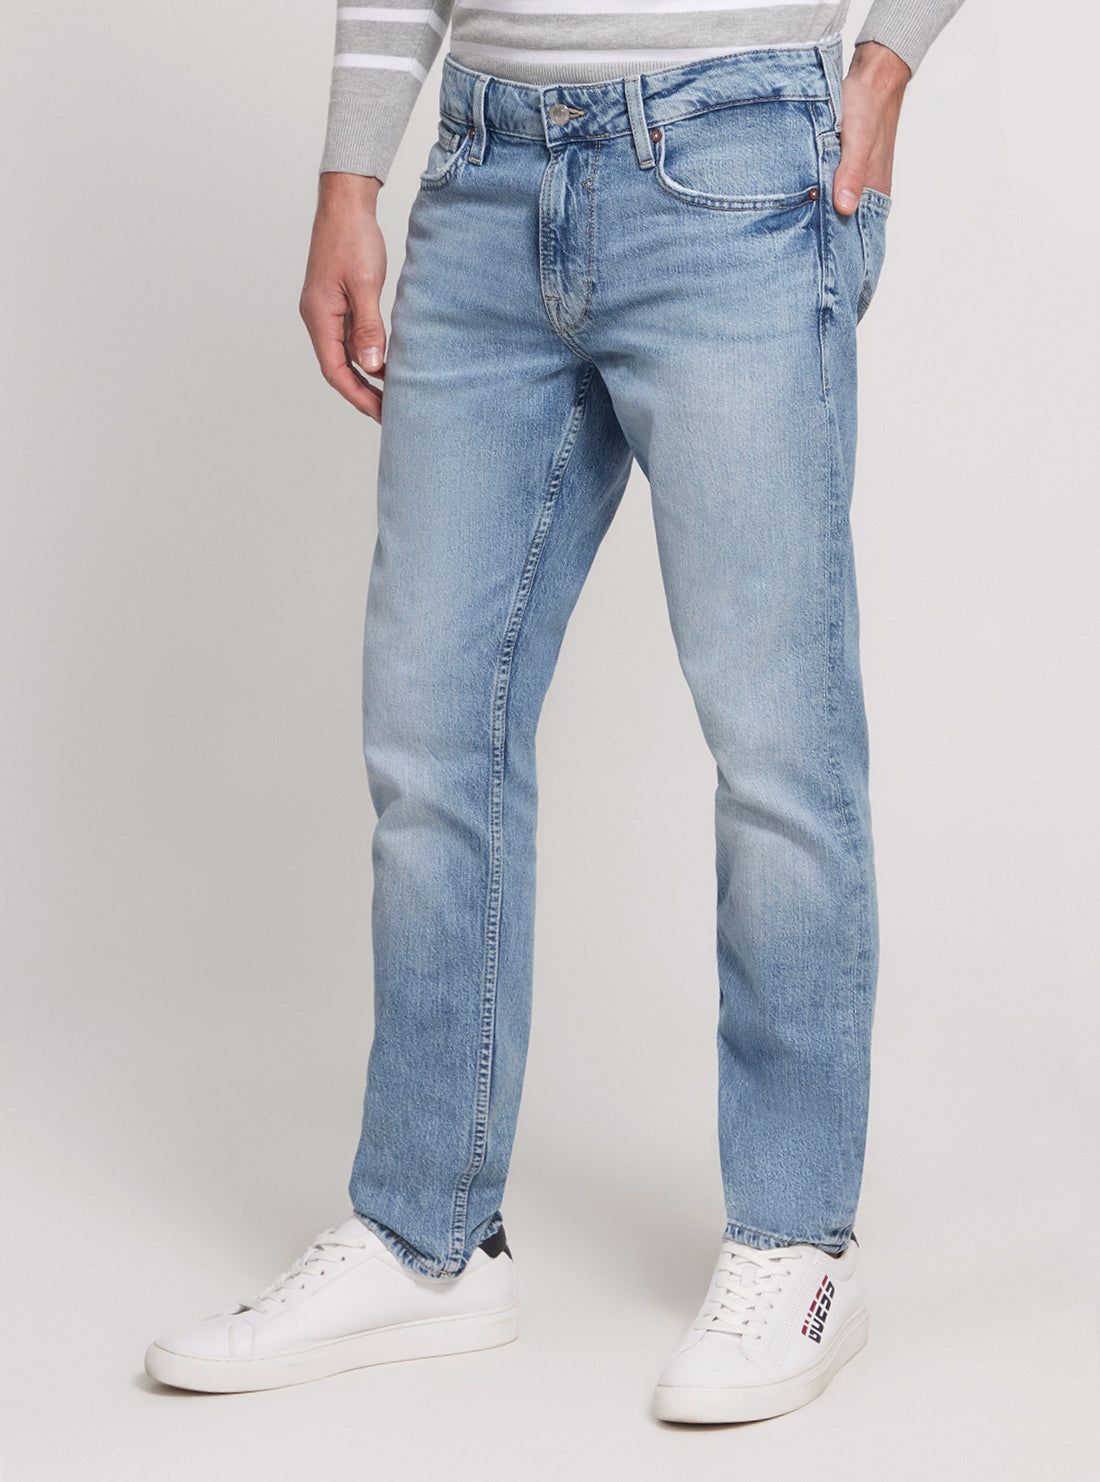 GUESS Low Rise Slim Tapered Denim Jeans in Light Wash side view